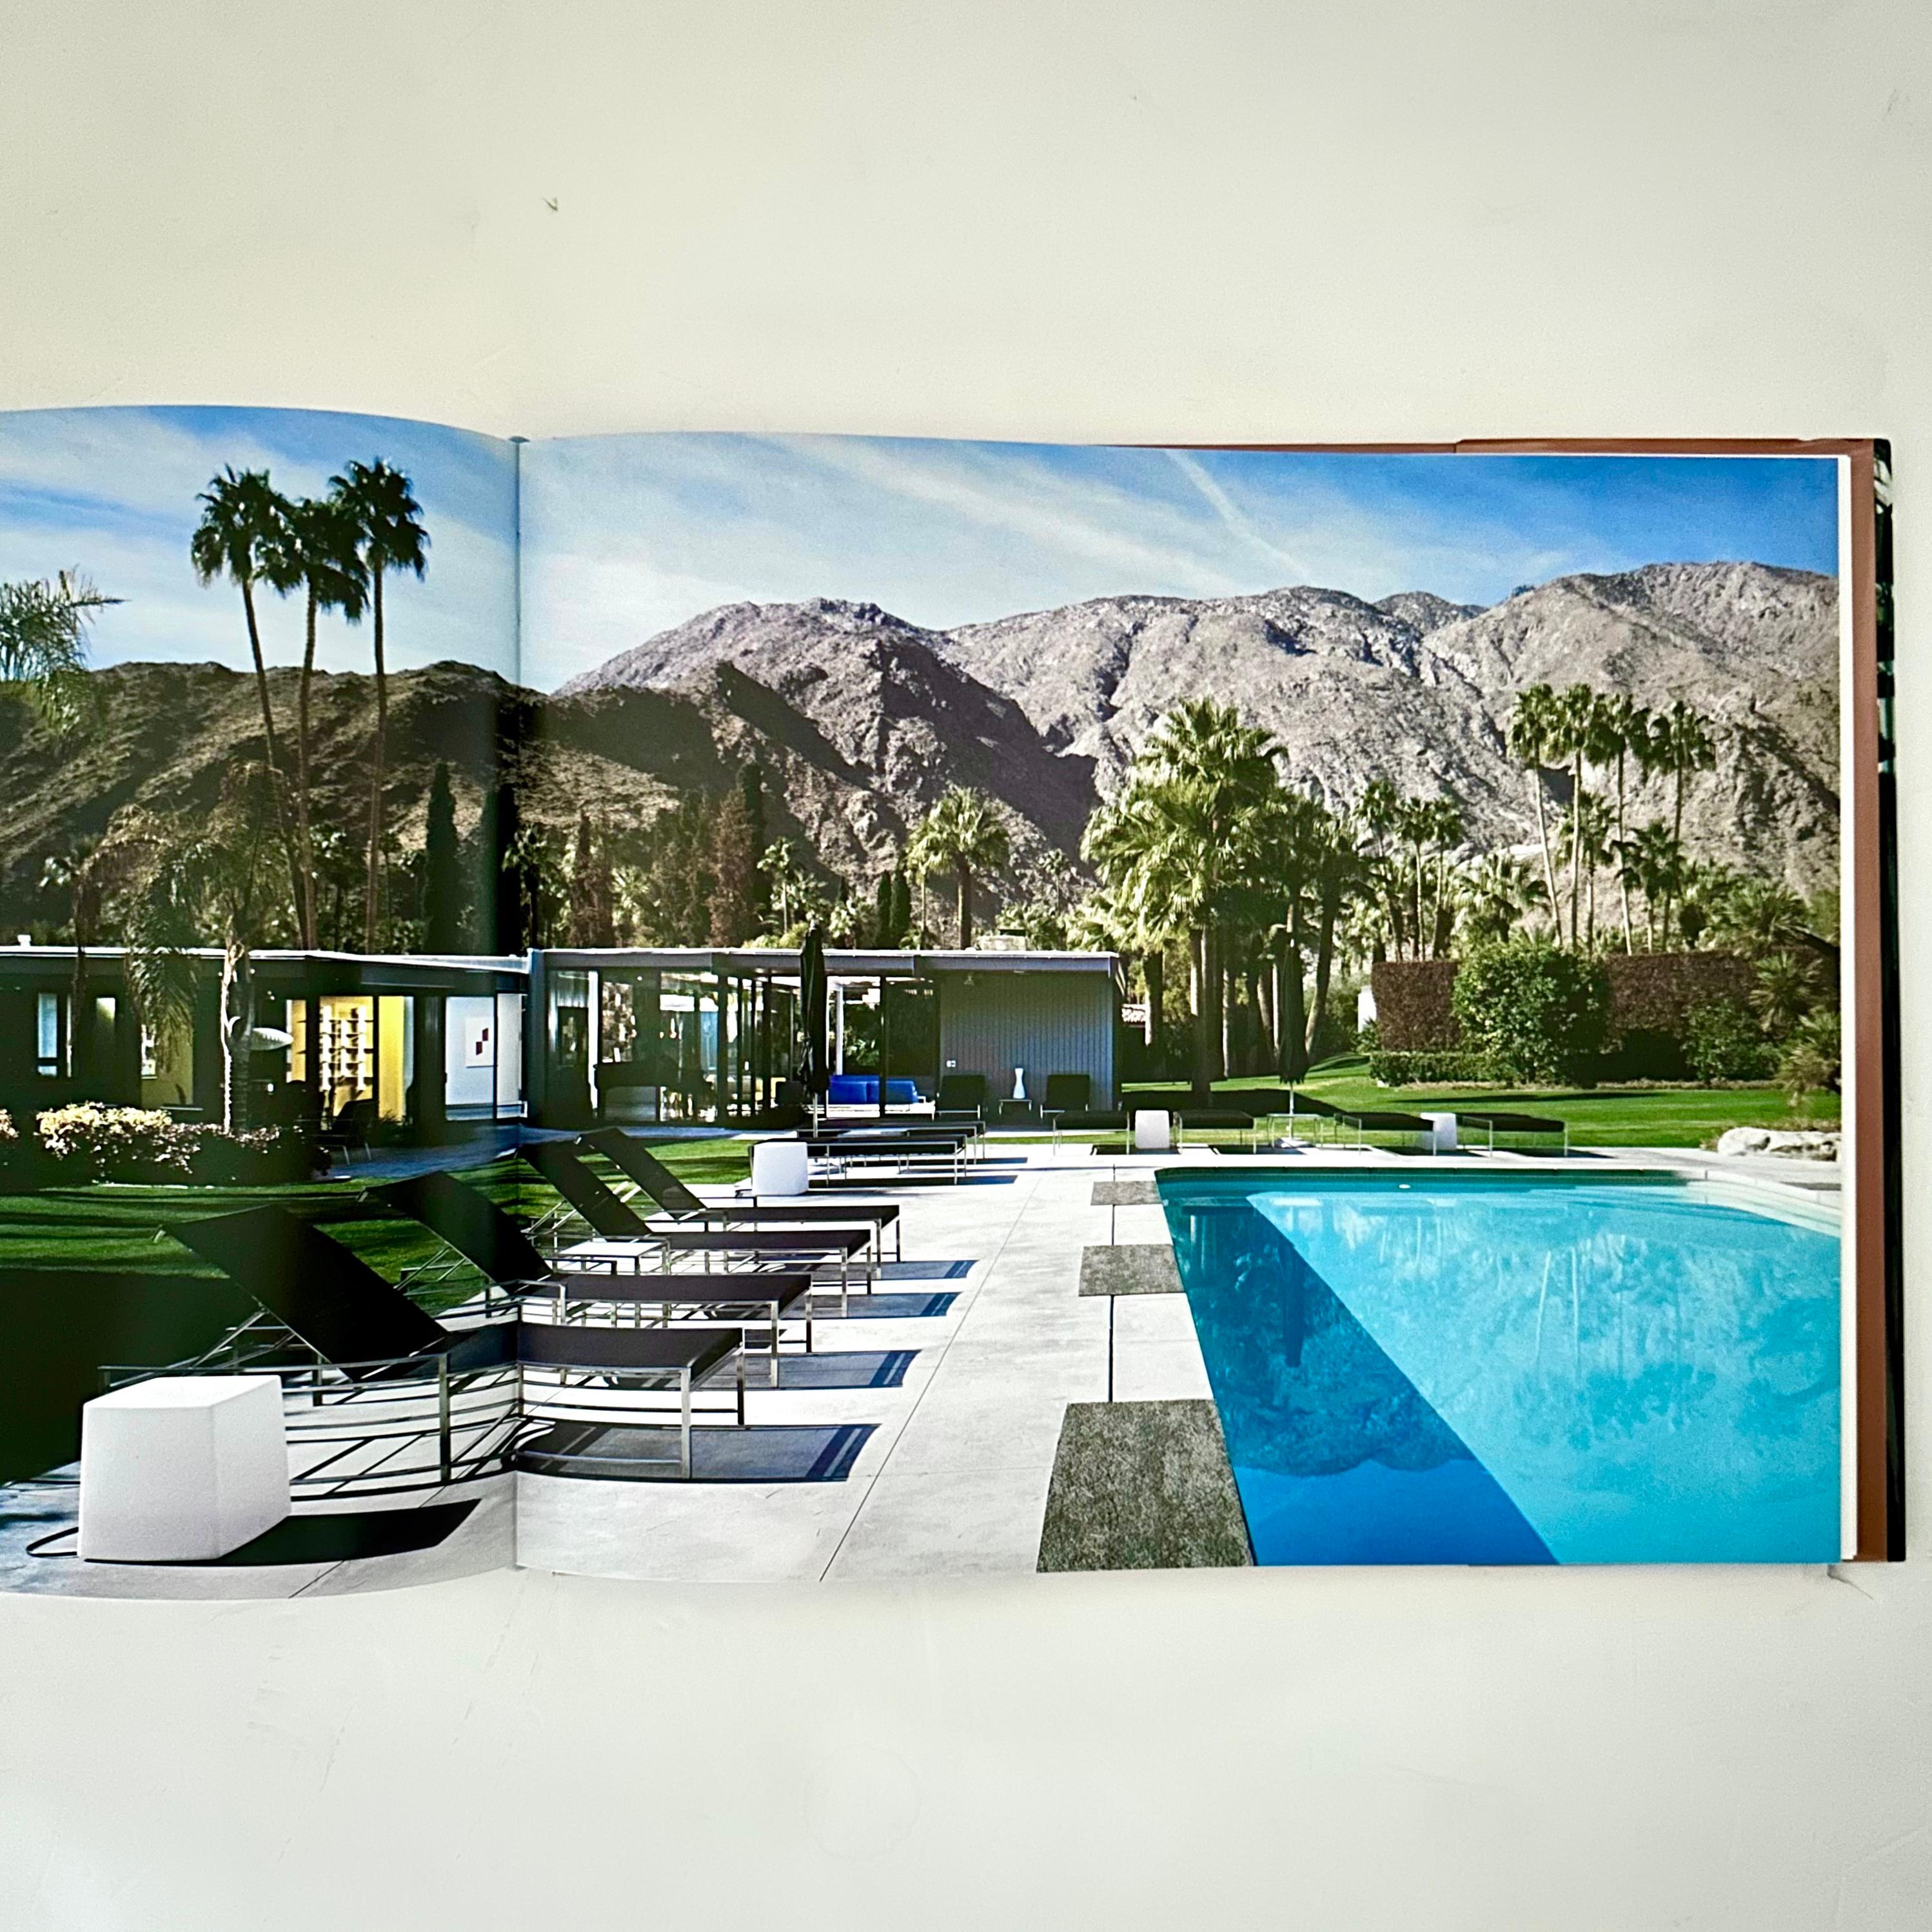 Contemporary Julius Shulman: Palm Springs - Michael Stern & Alan Hess - 1st Edition, 2008 For Sale